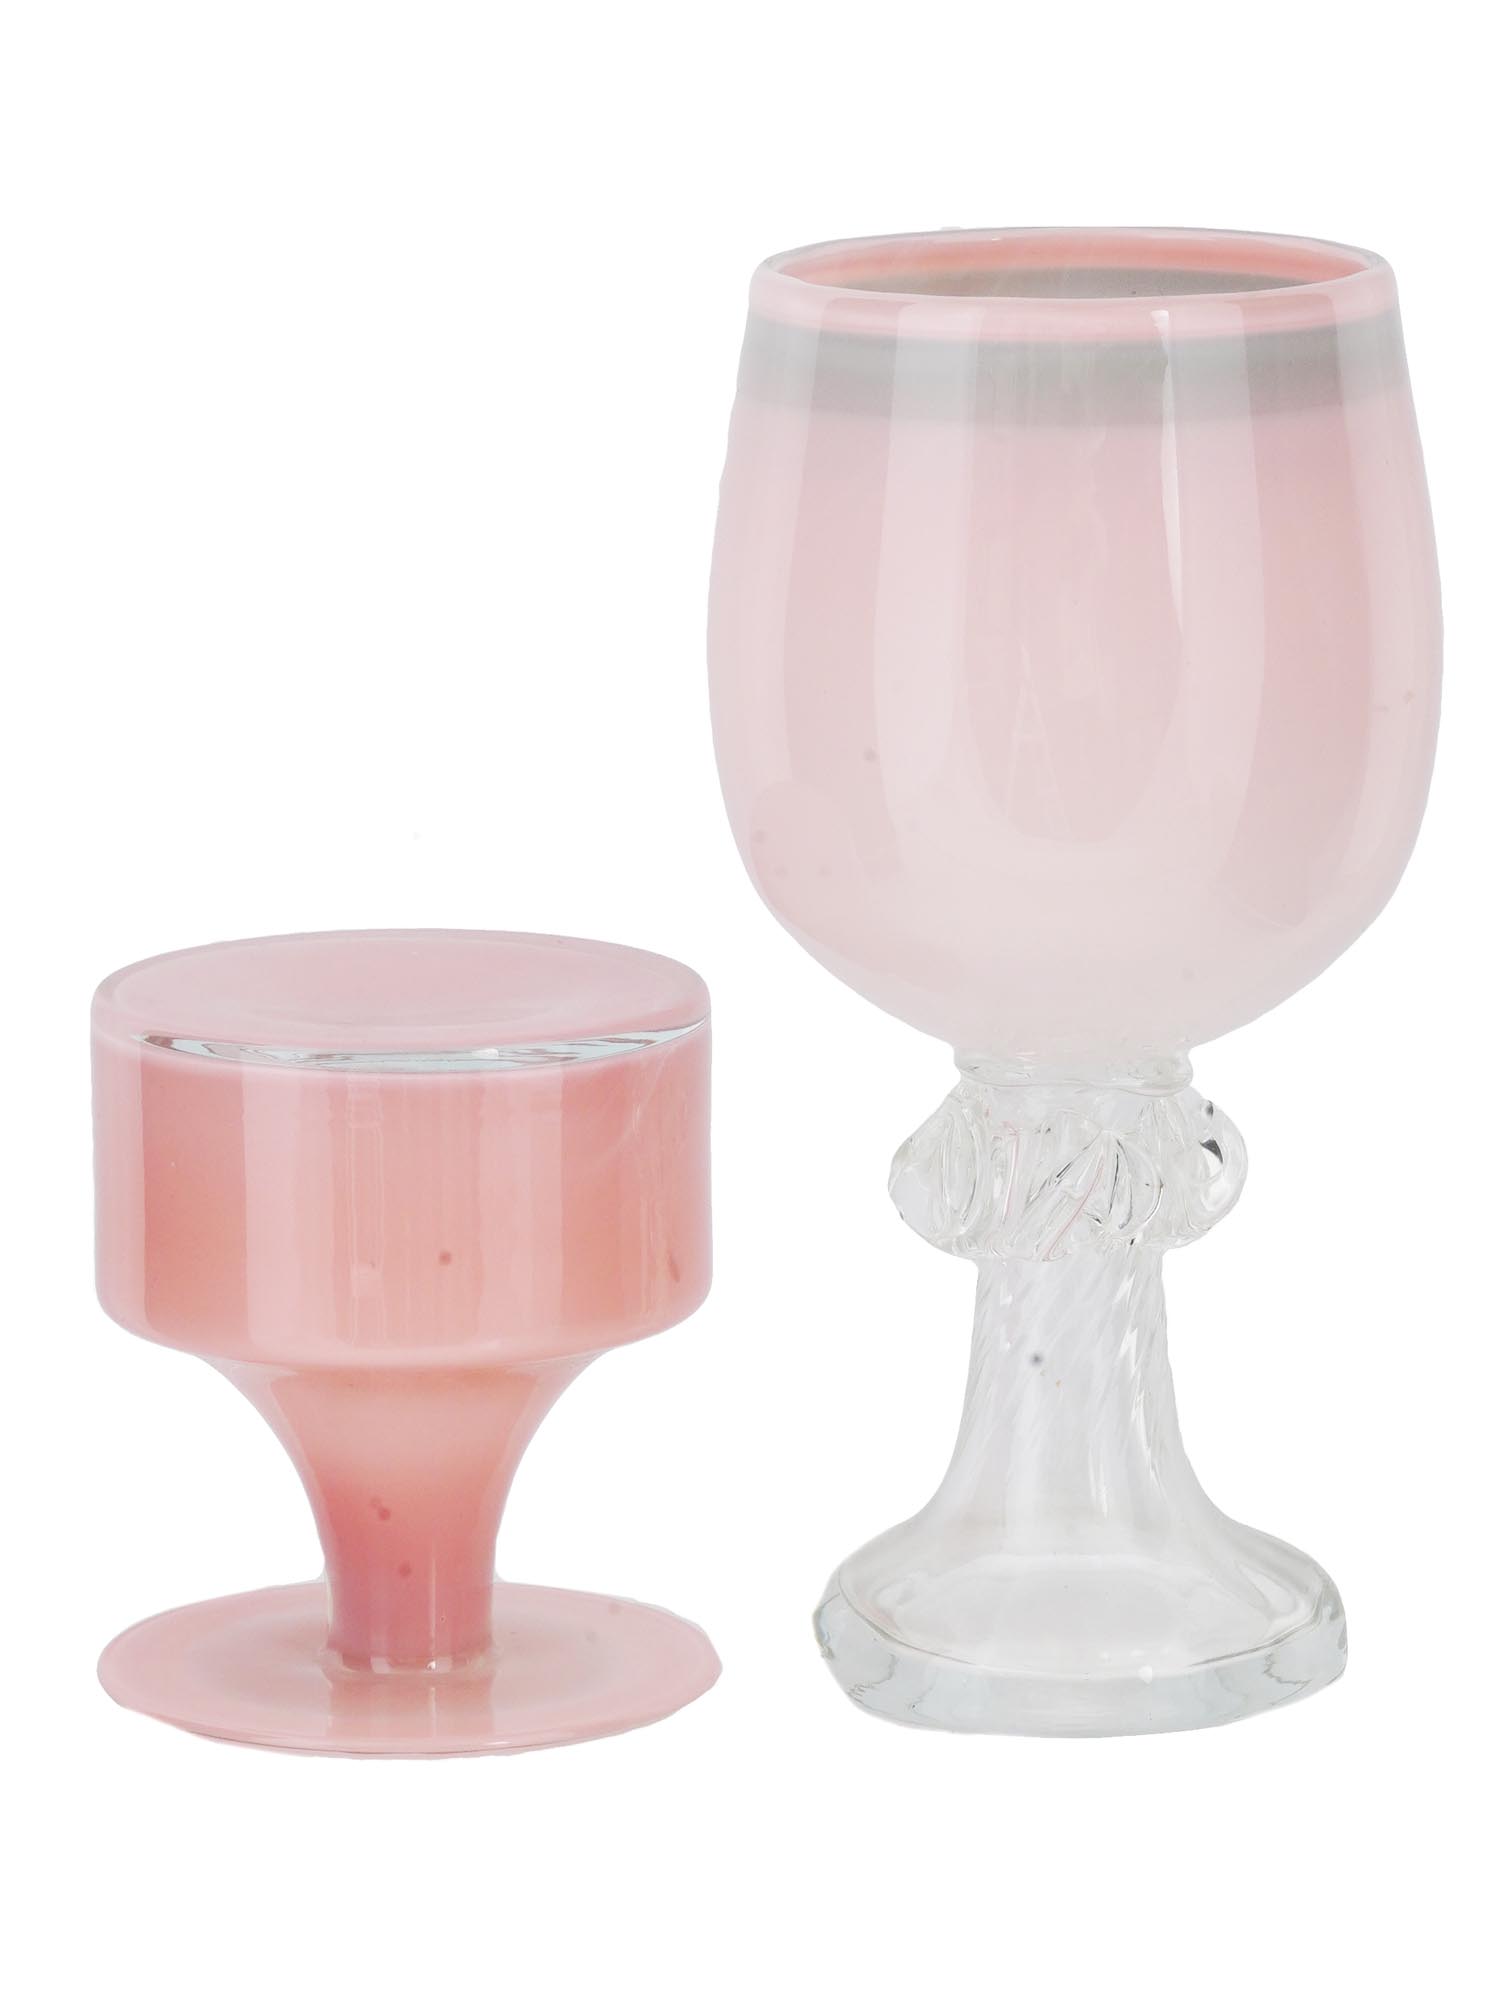 VINTAGE PINK GLASS WINE GOBLET AND CANDLE HOLDER PIC-0